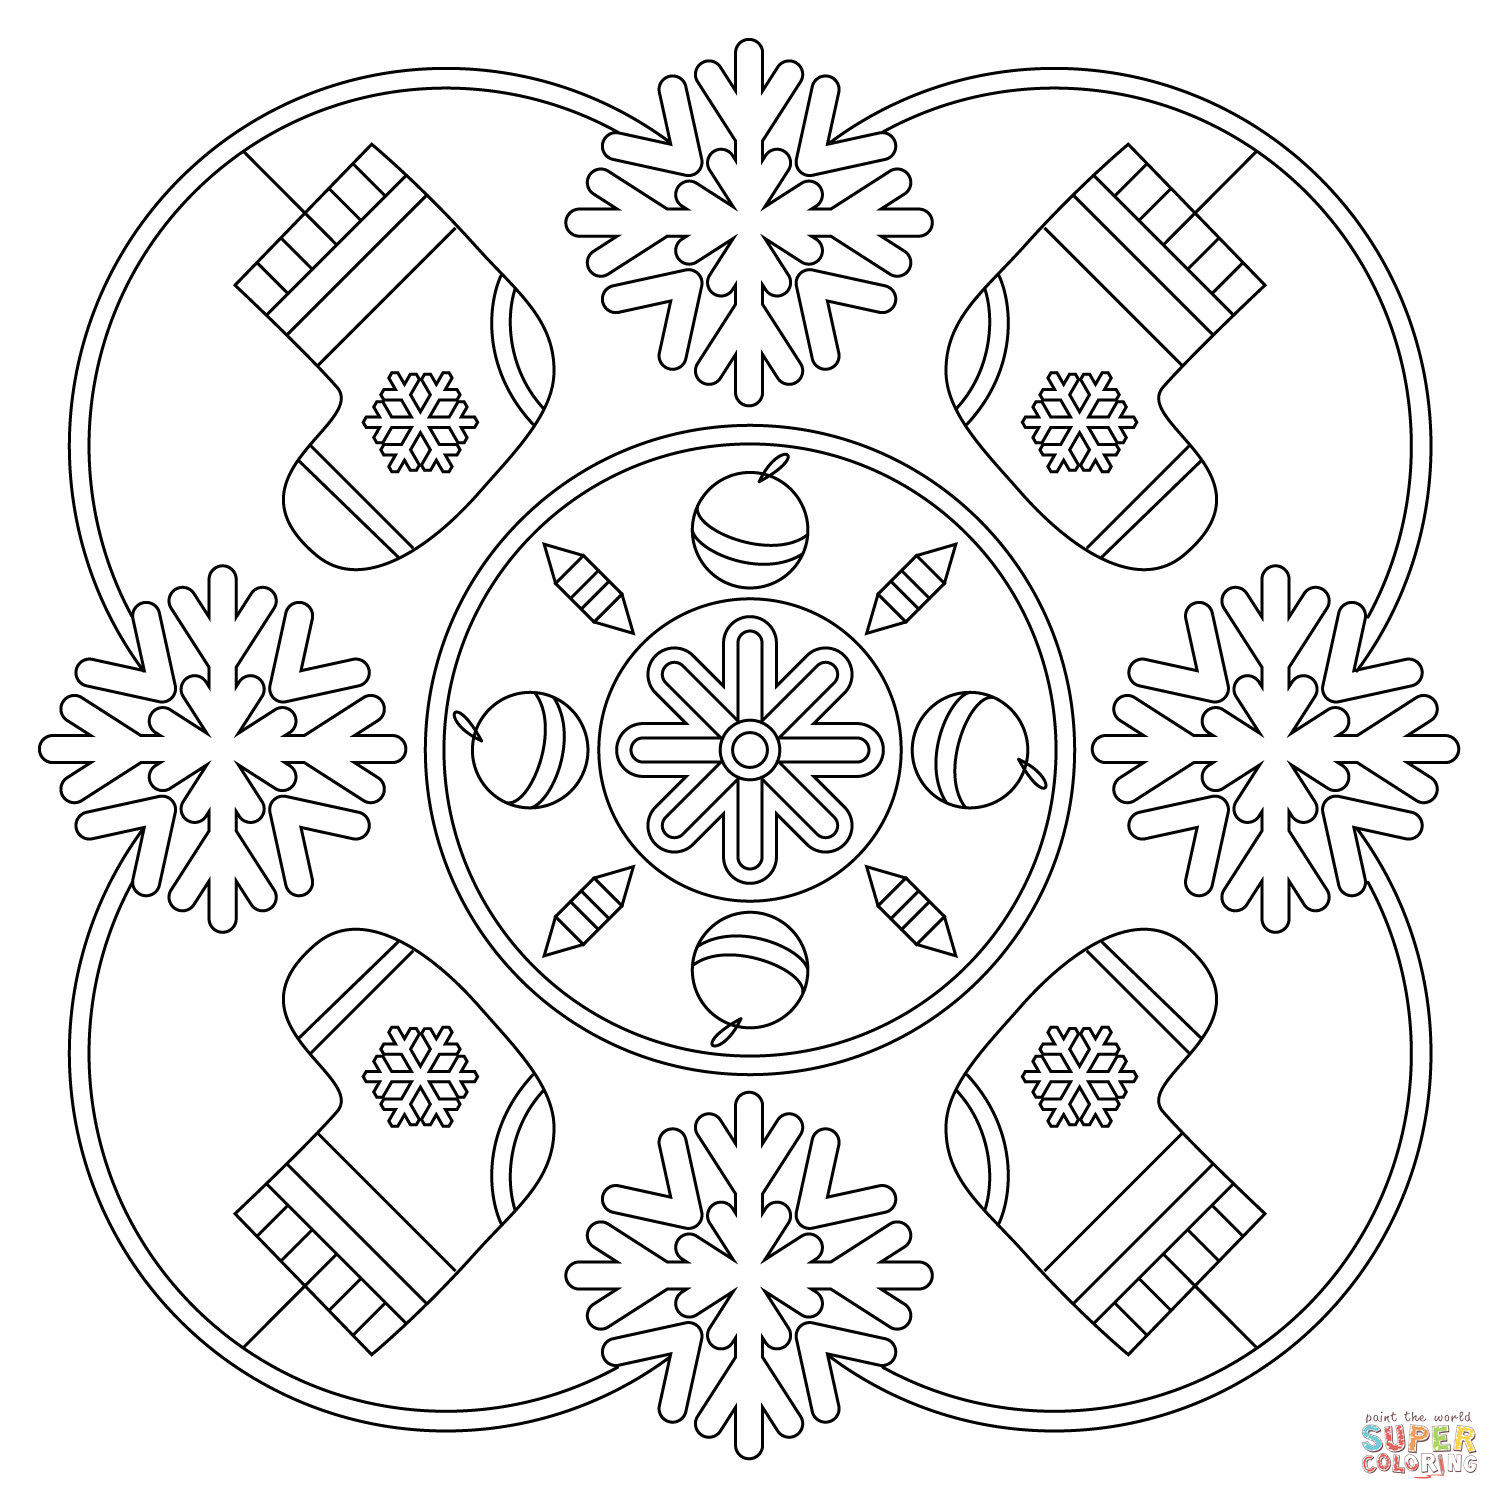 Mandala Coloring Pages Free Online Winter Mandala Coloring Page Free Printable Coloring Pages